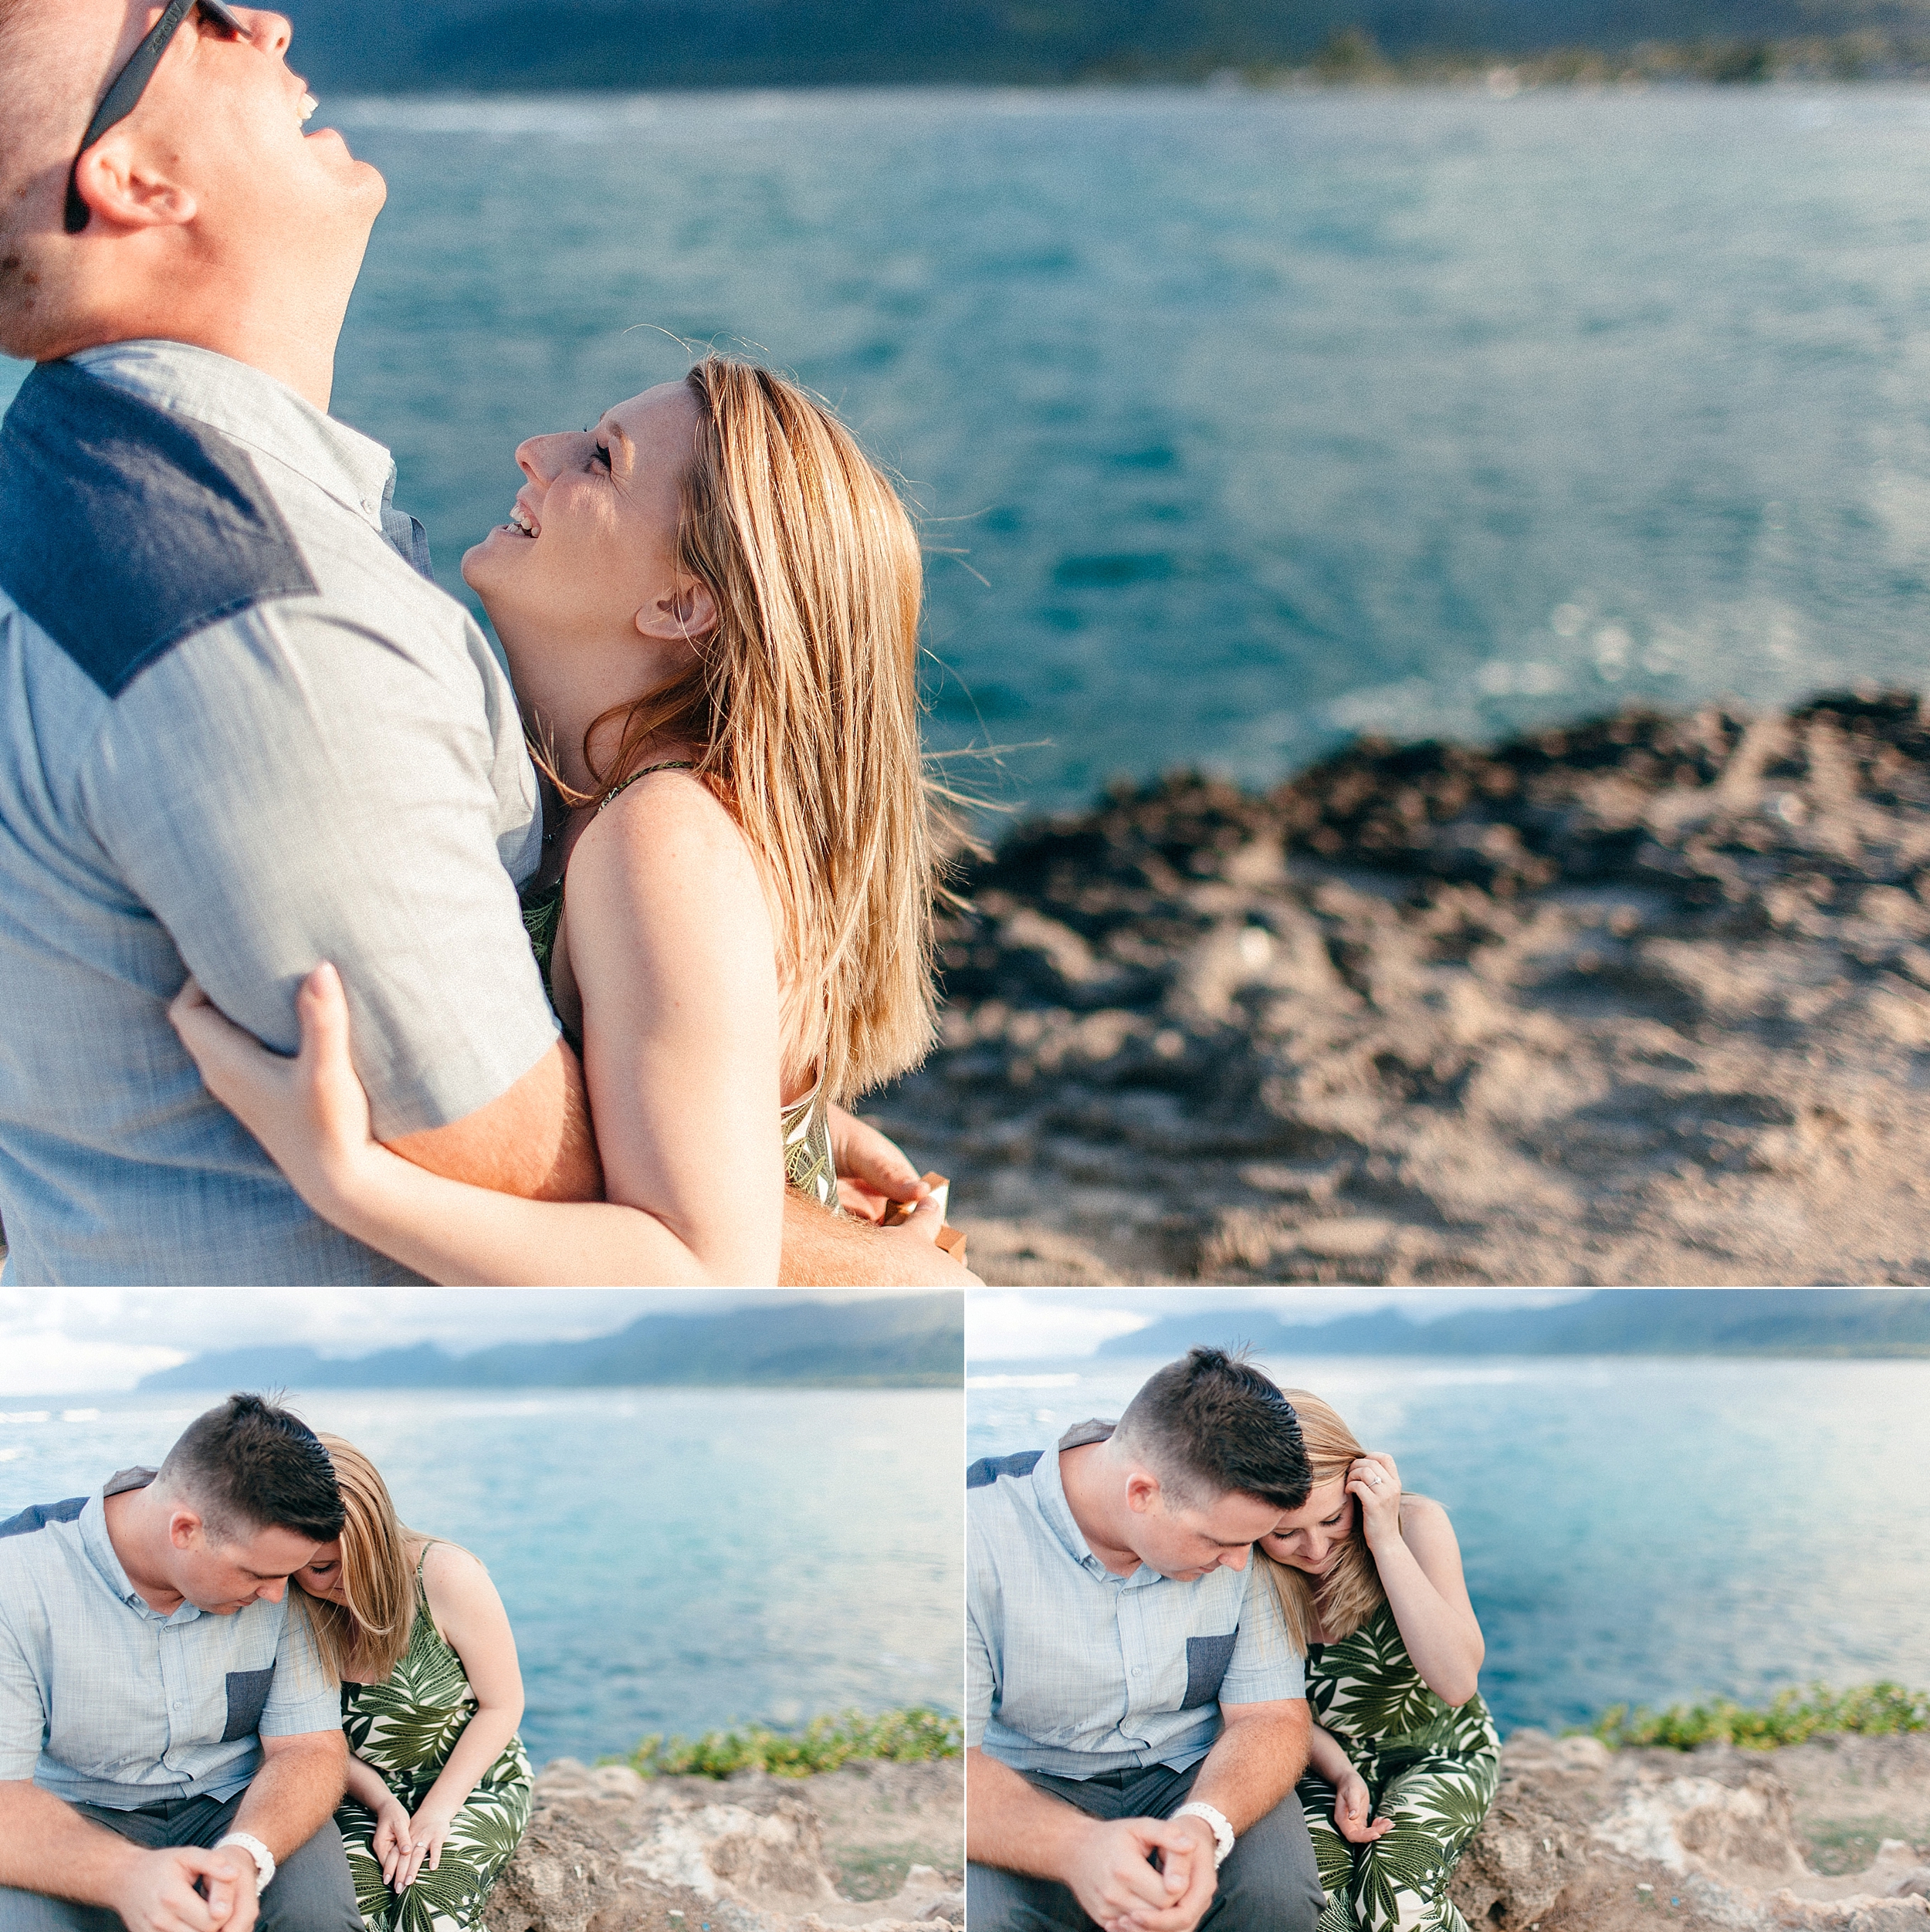  Surprise Proposal Photographer on the North Shore of Oahu, Hawaii 